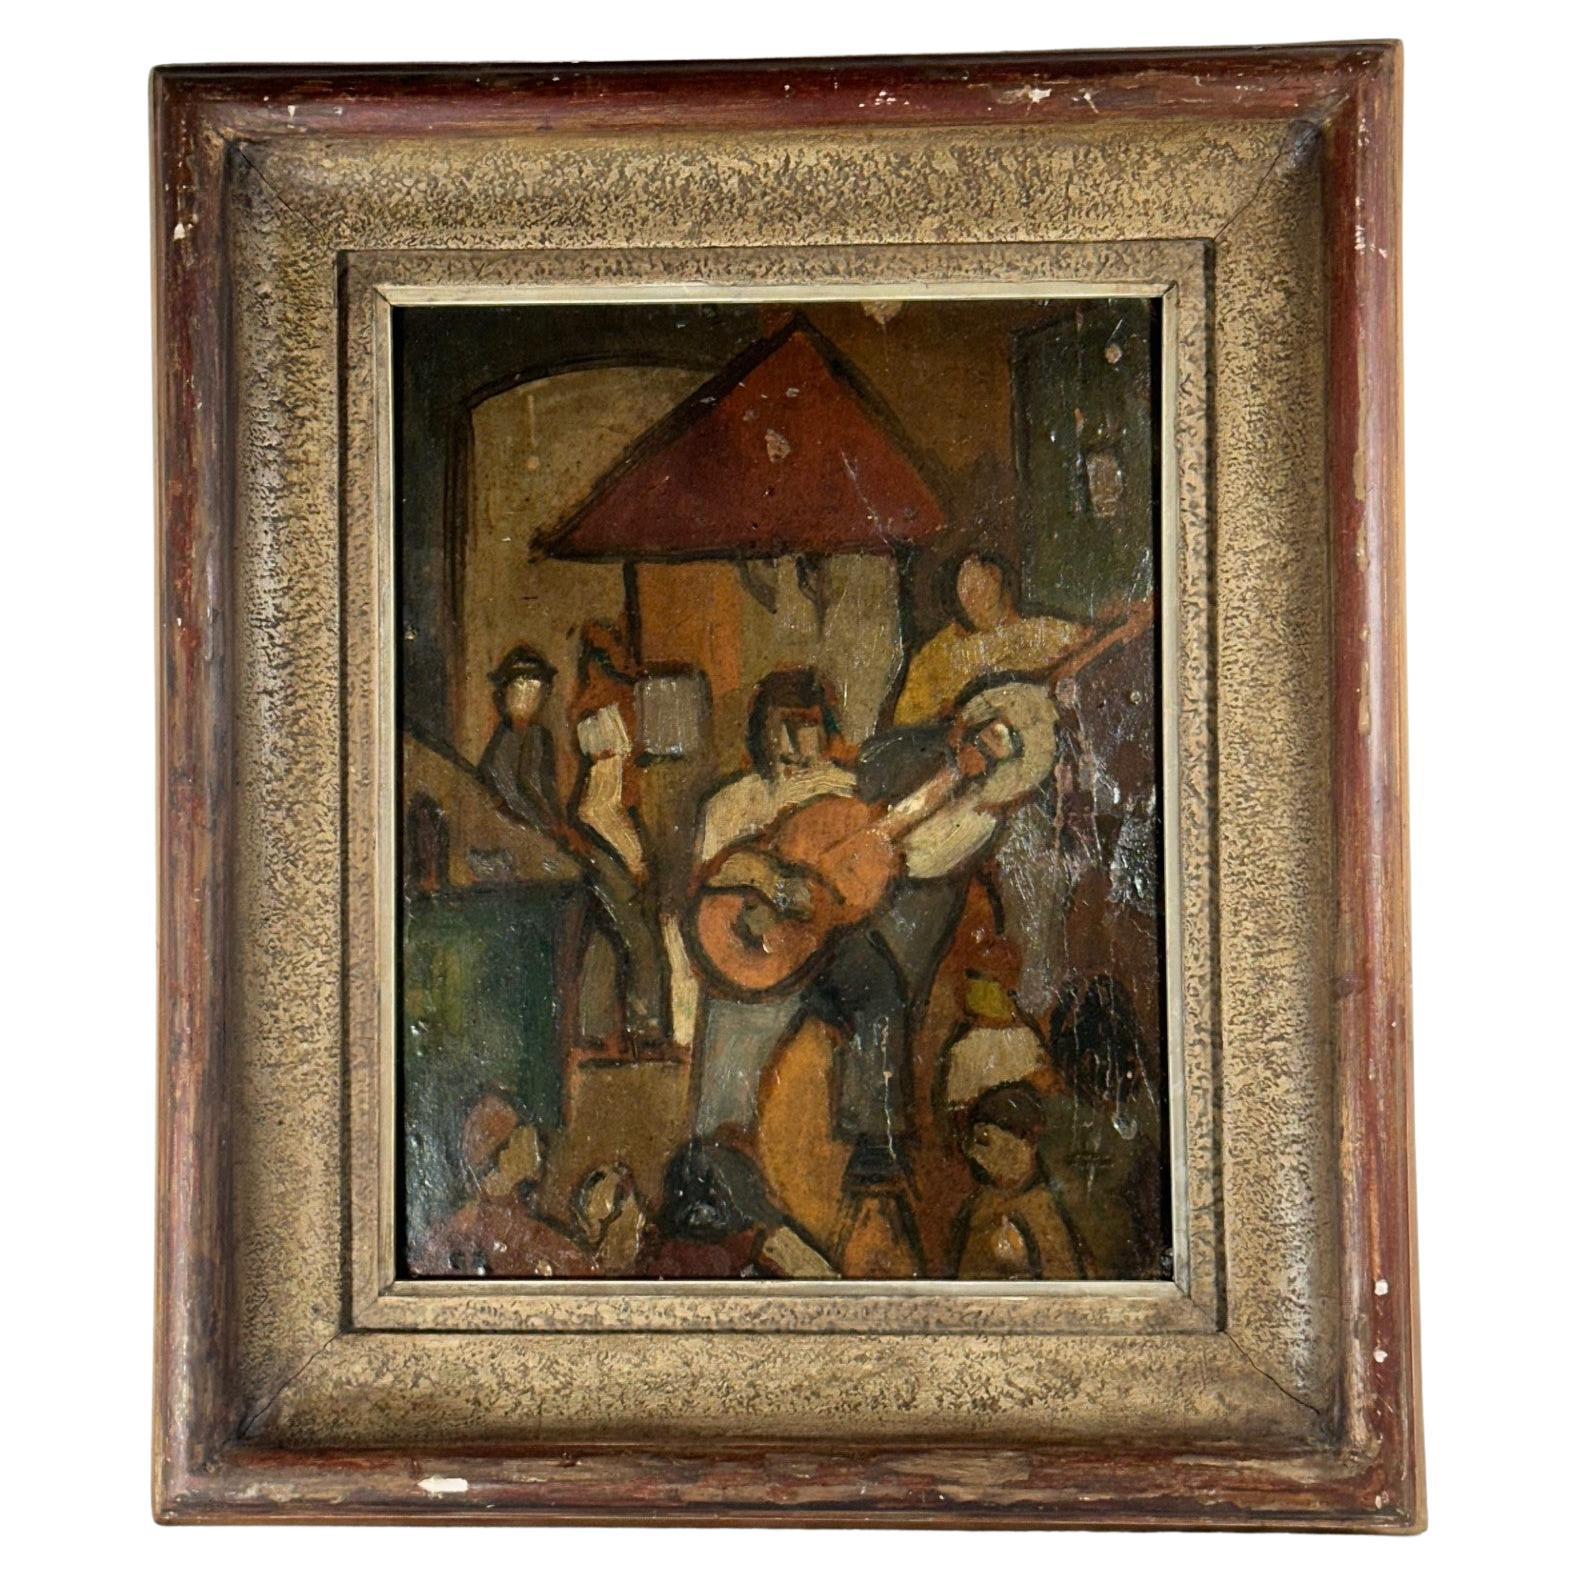 George Rouault Studio Fauvism Oil Painting on Paper on Board.